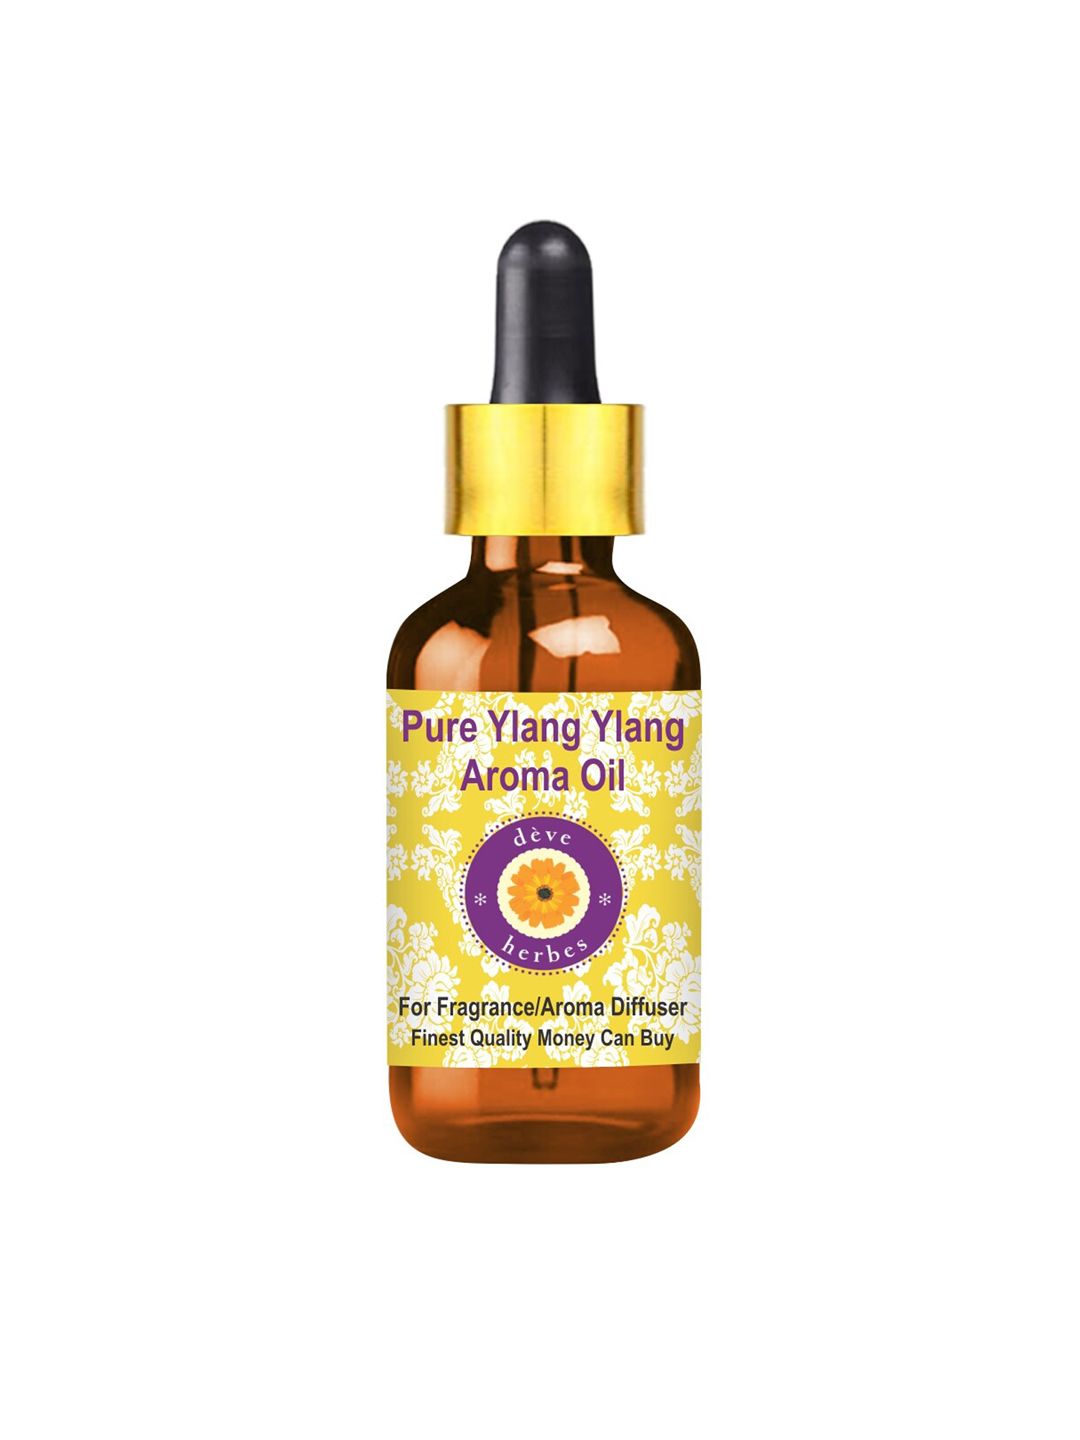 Deve Herbes Yellow Pure Ylang Ylang Aroma Oil 100ml Price in India